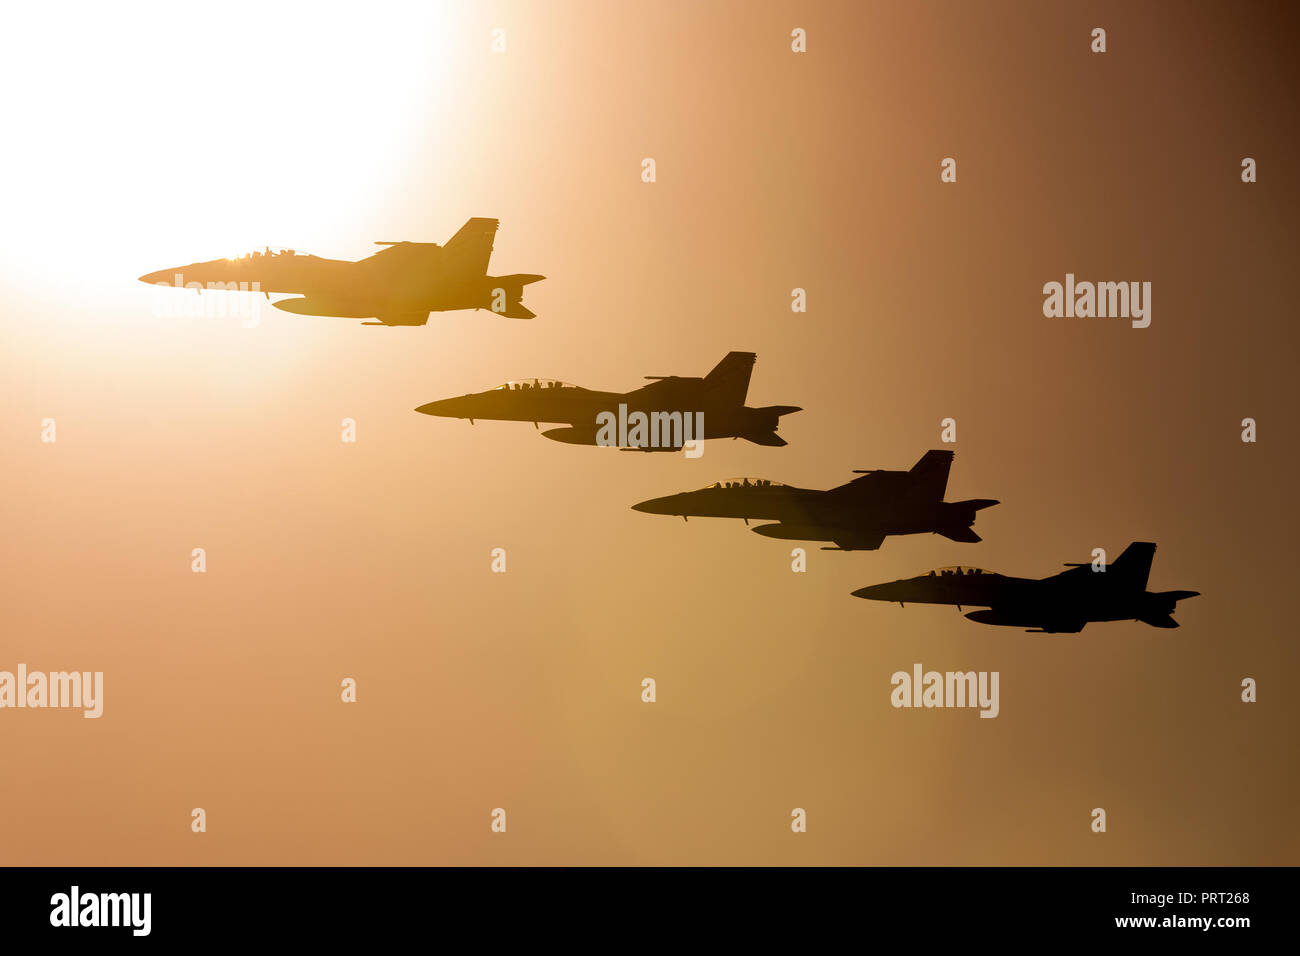 Four Royal Australian Air Force (RAAF) Boeing F/A-18F Super Hornet multirole fighter aircraft flying in formation at sunset. Stock Photo